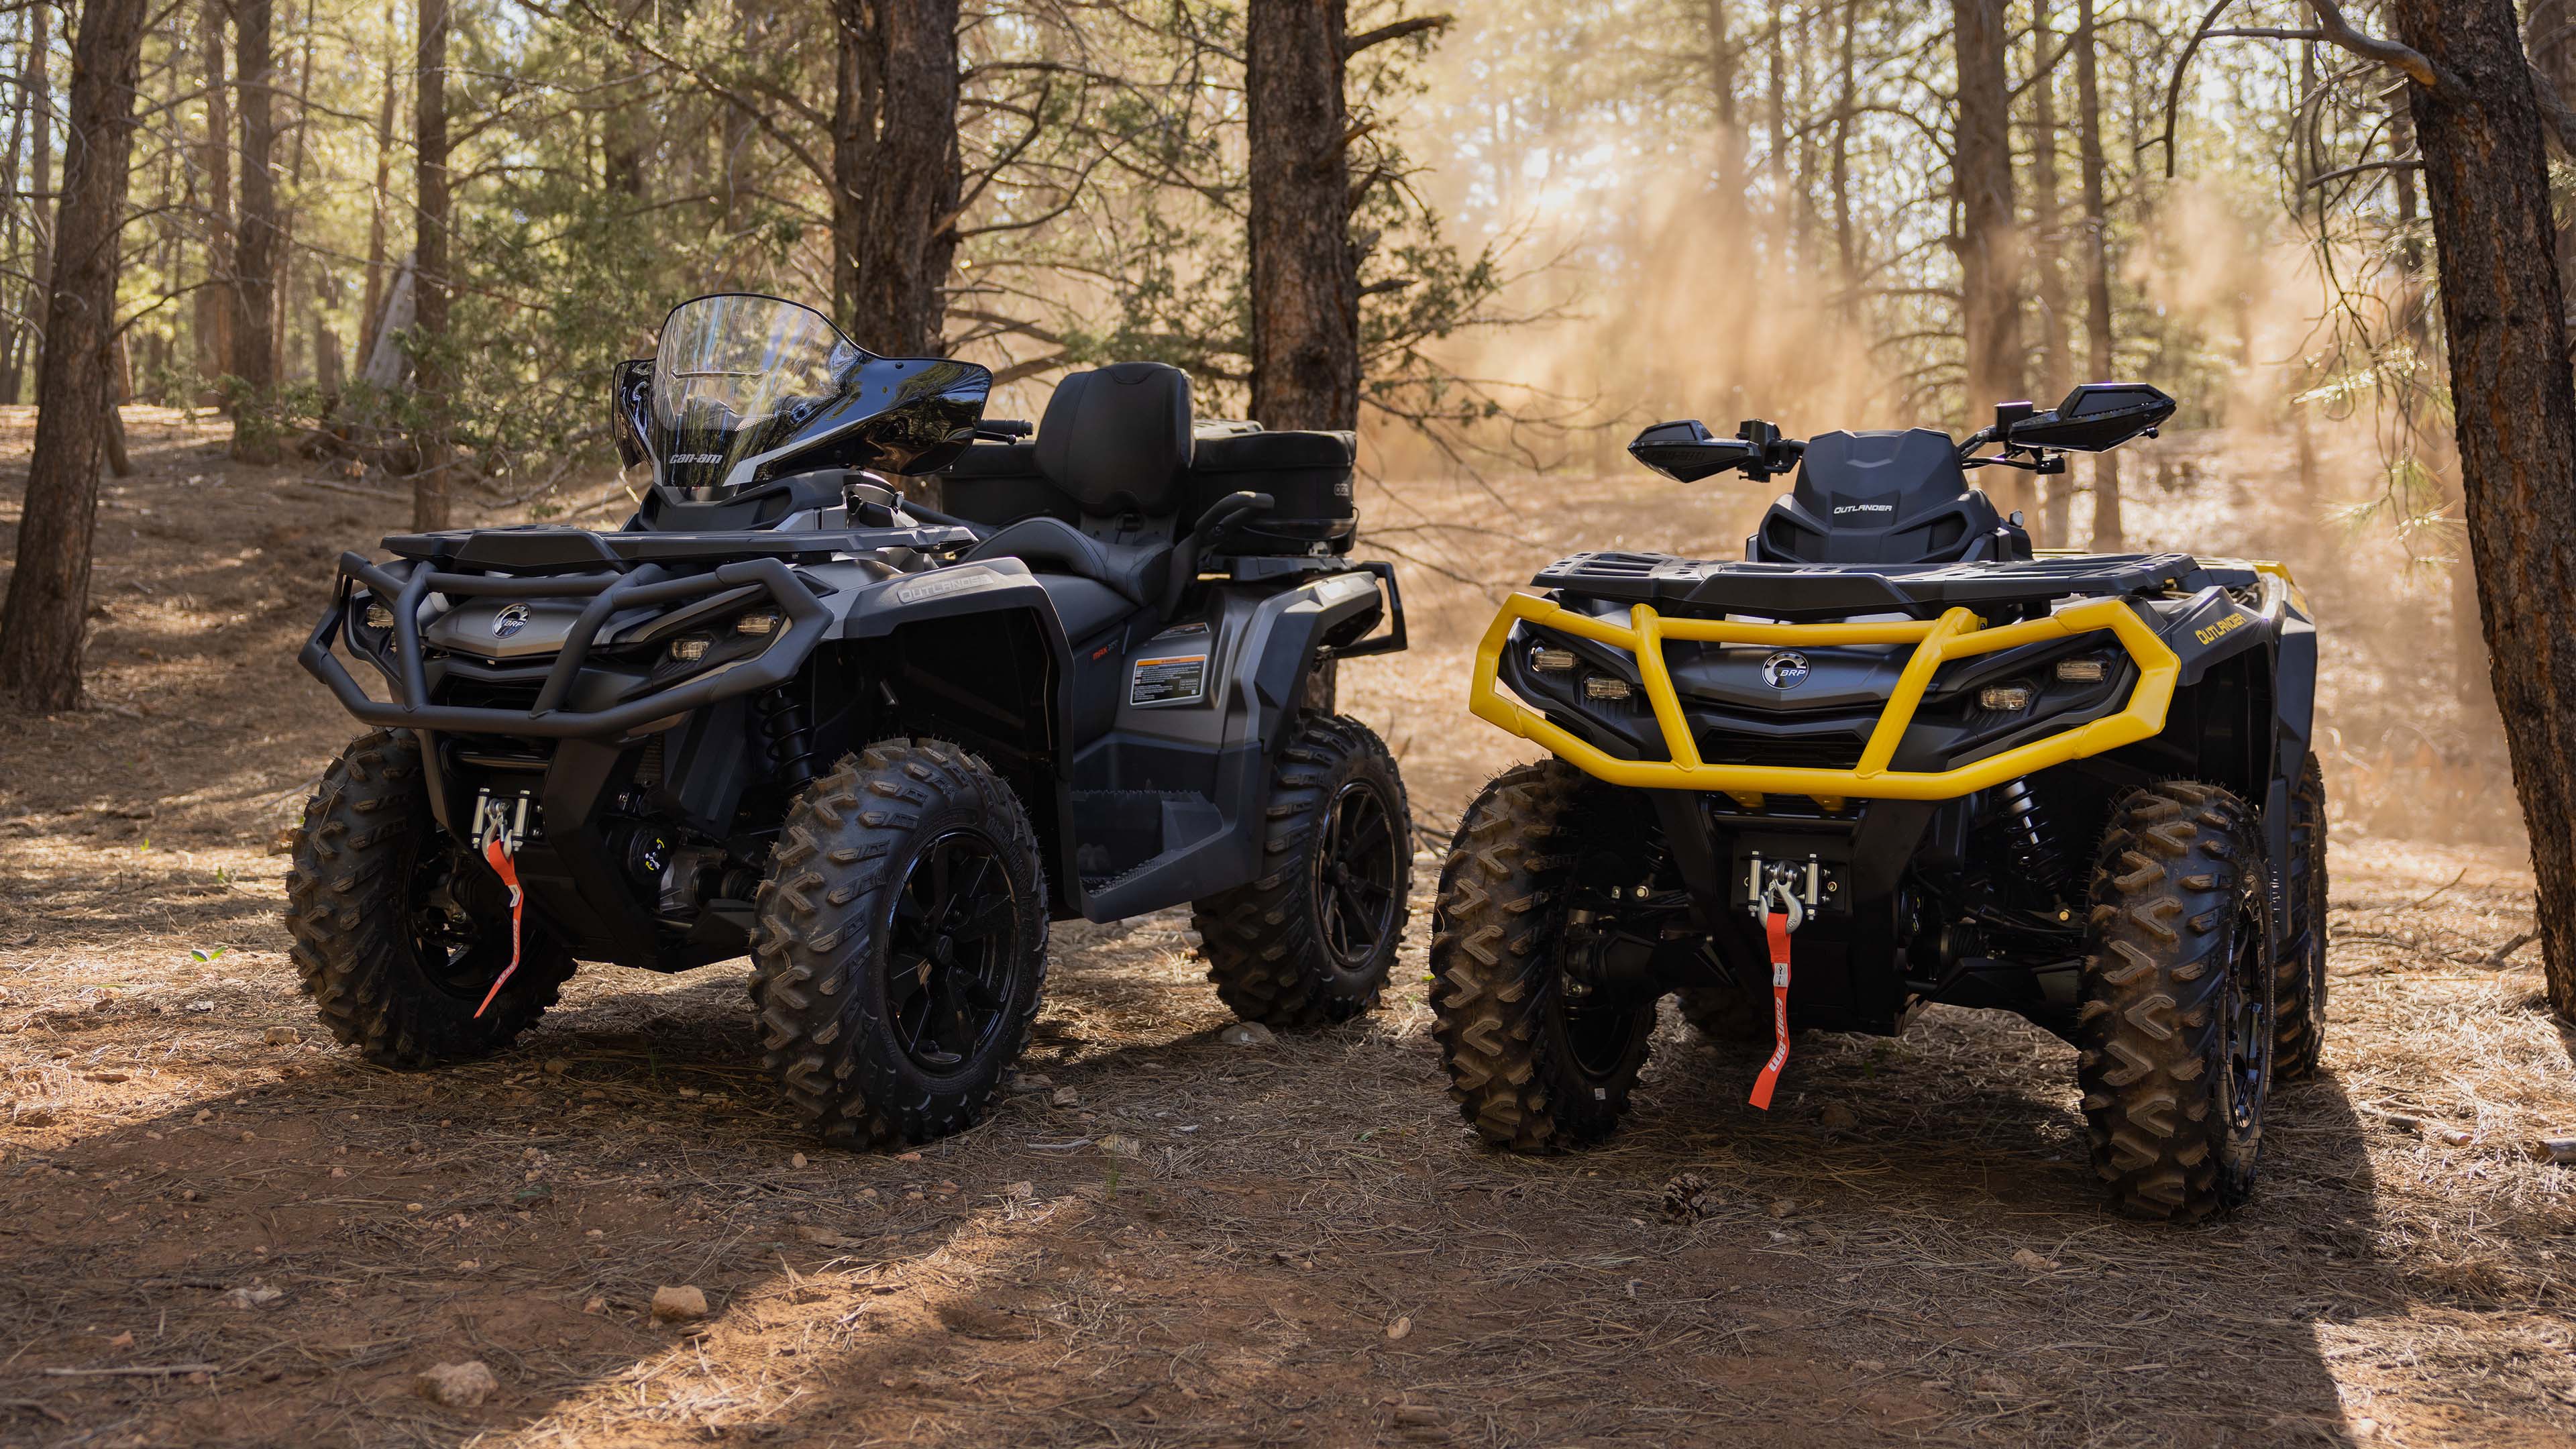 Front view of two Can-Am Outlanders loaded with accessories, parked in a wooded area.